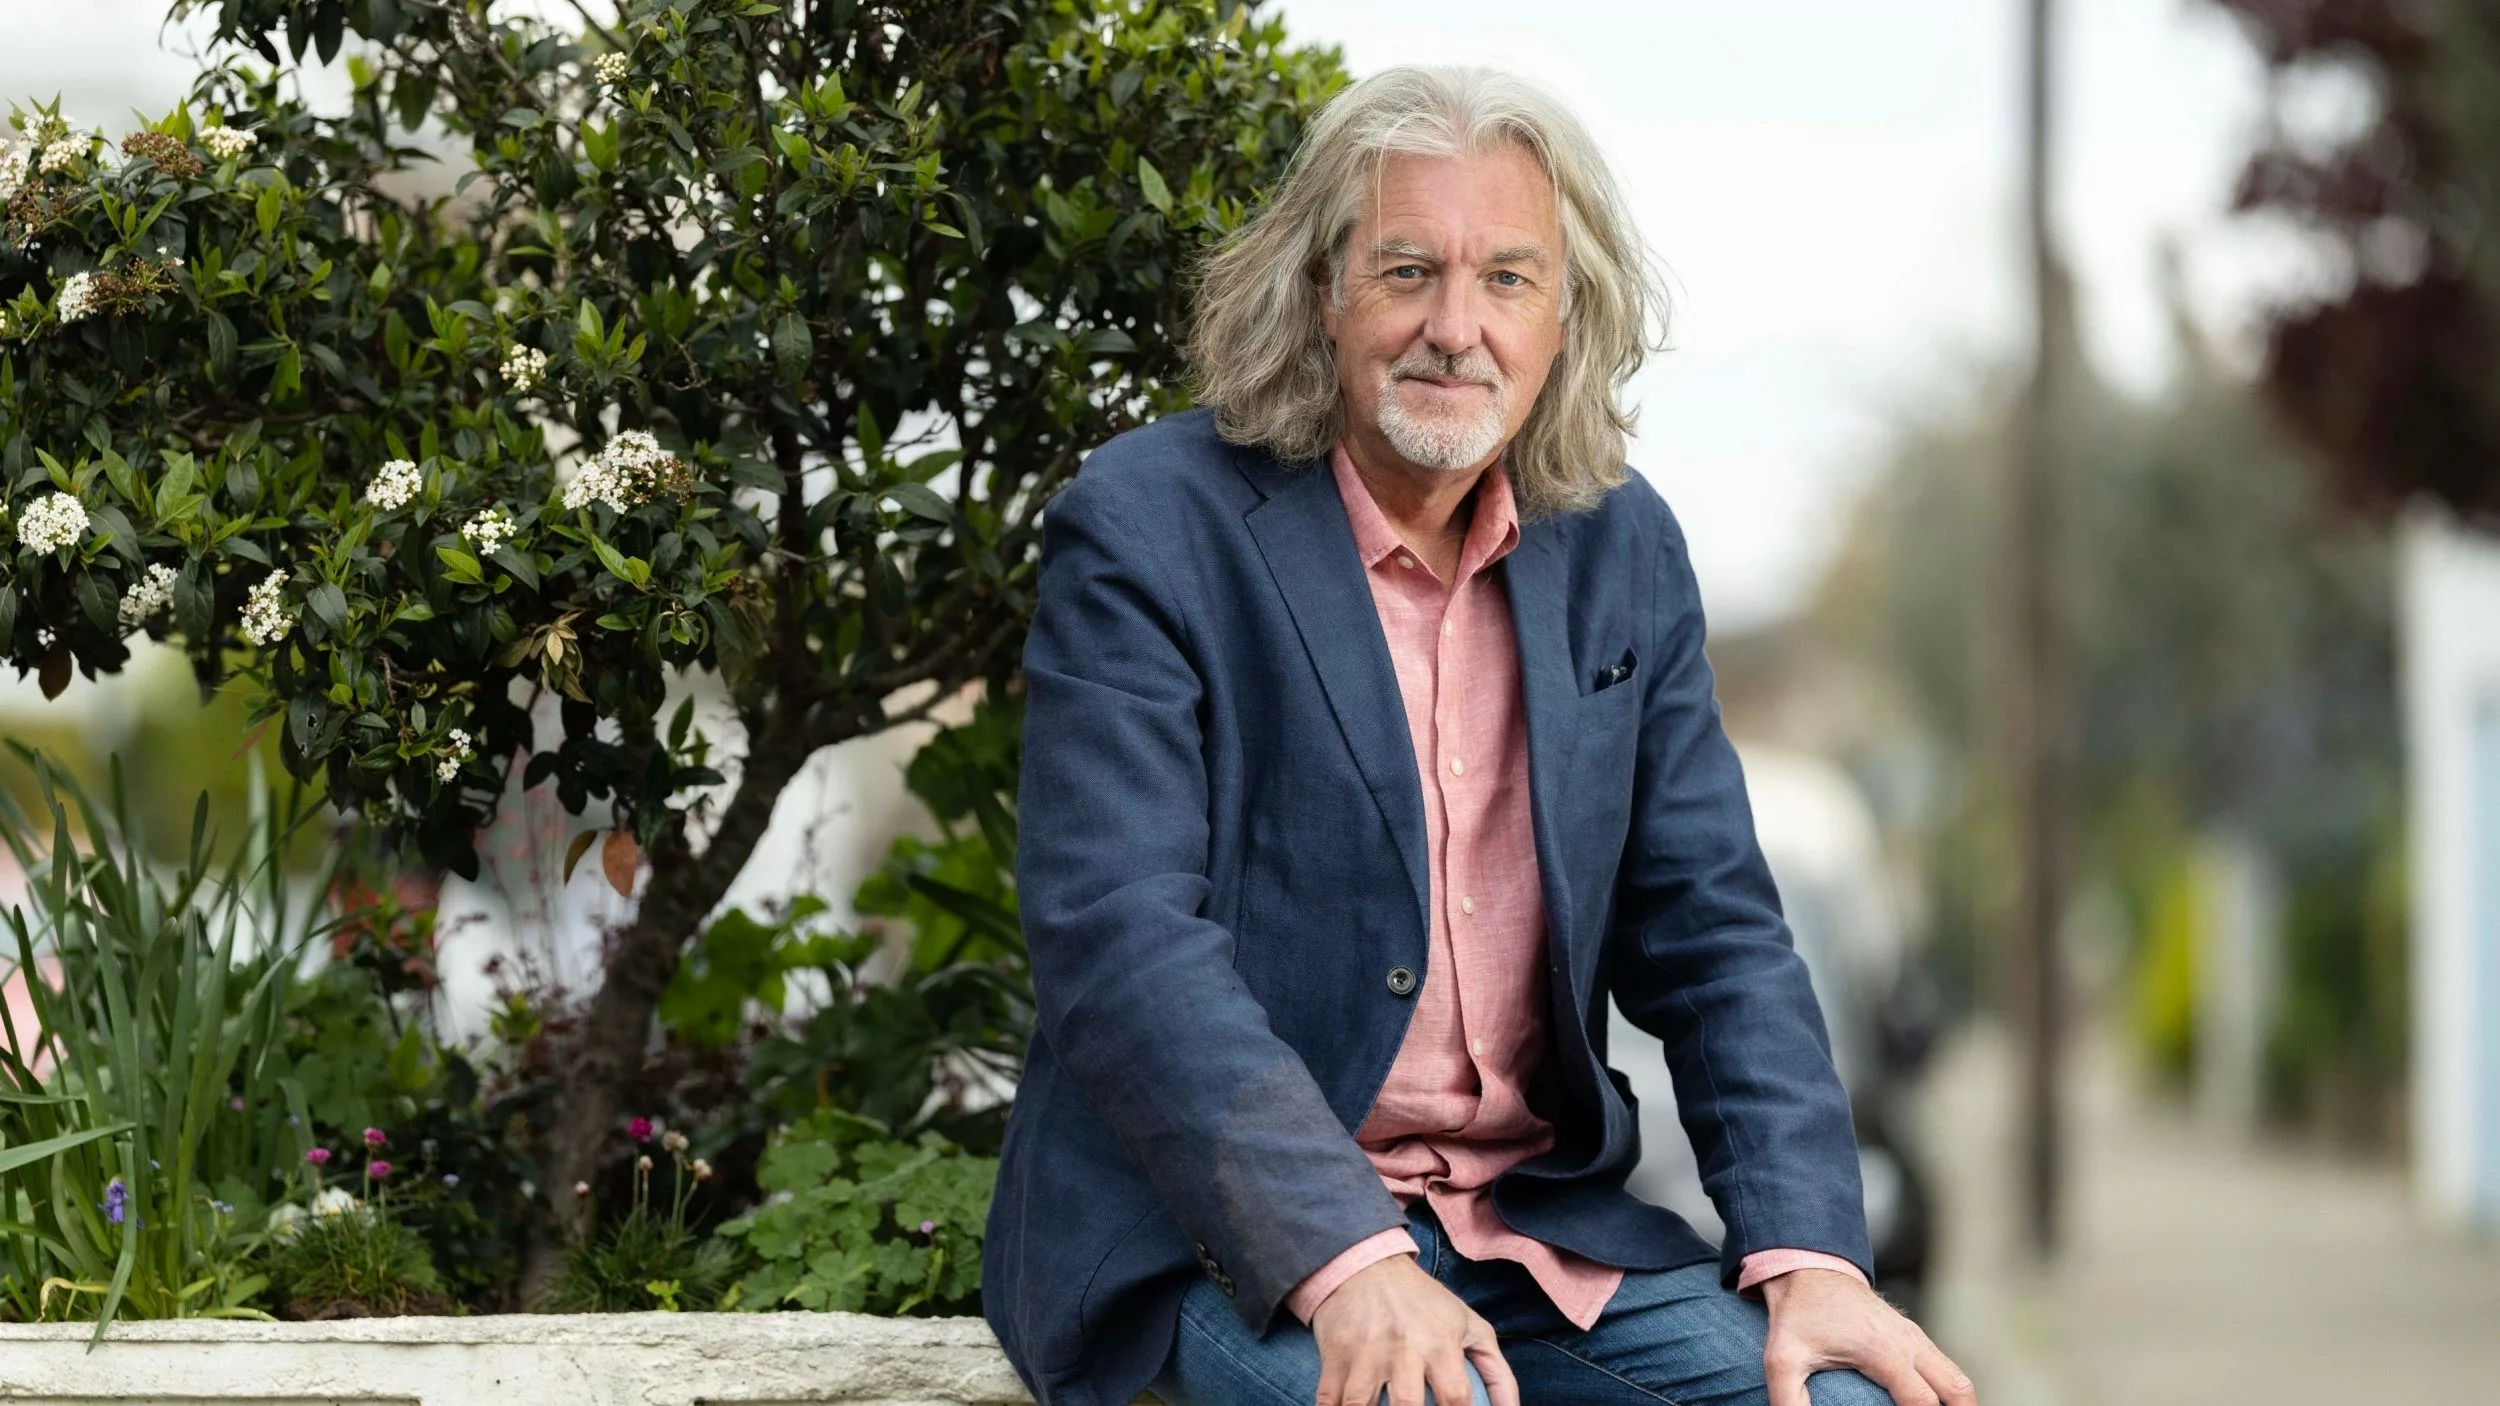 James May: Our Man in India Review